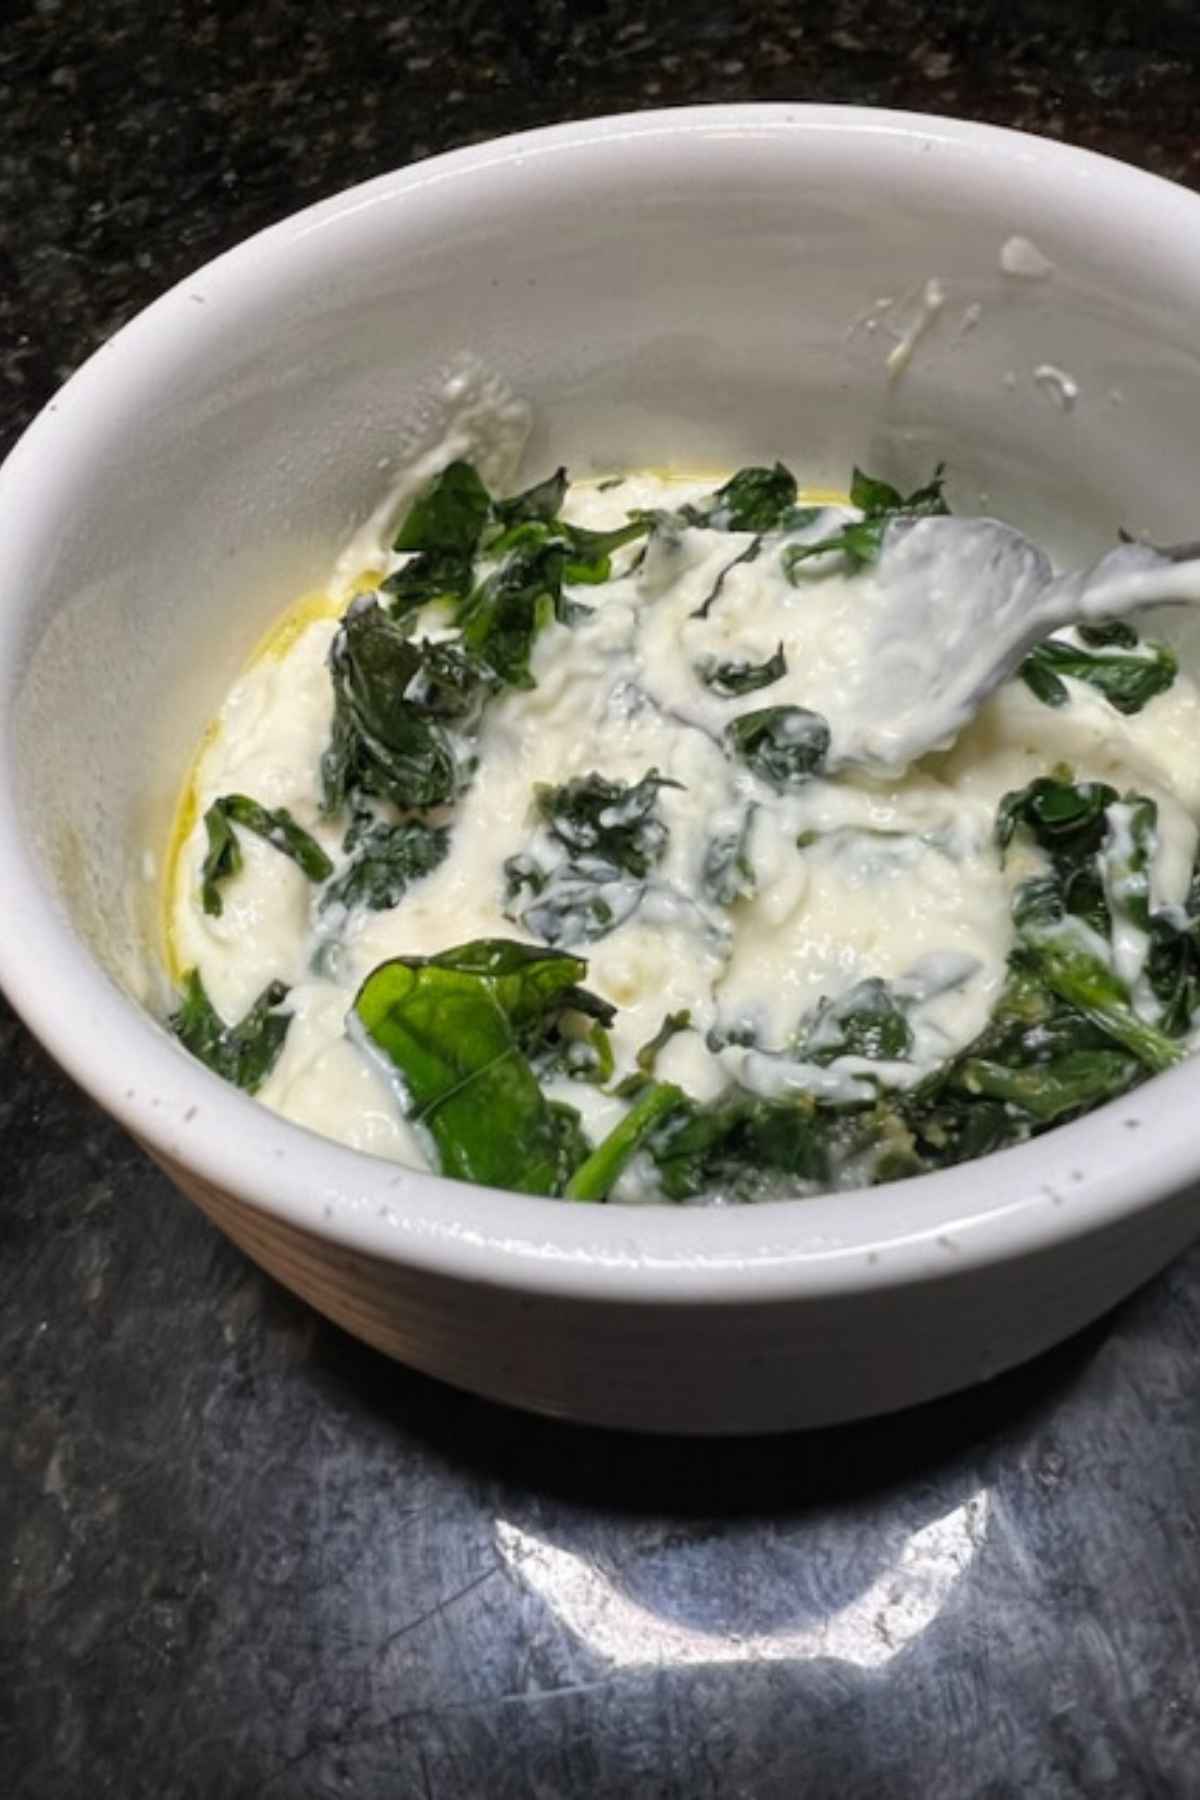 mix spinach and cottage cheese for gluten free spinach dip recipe